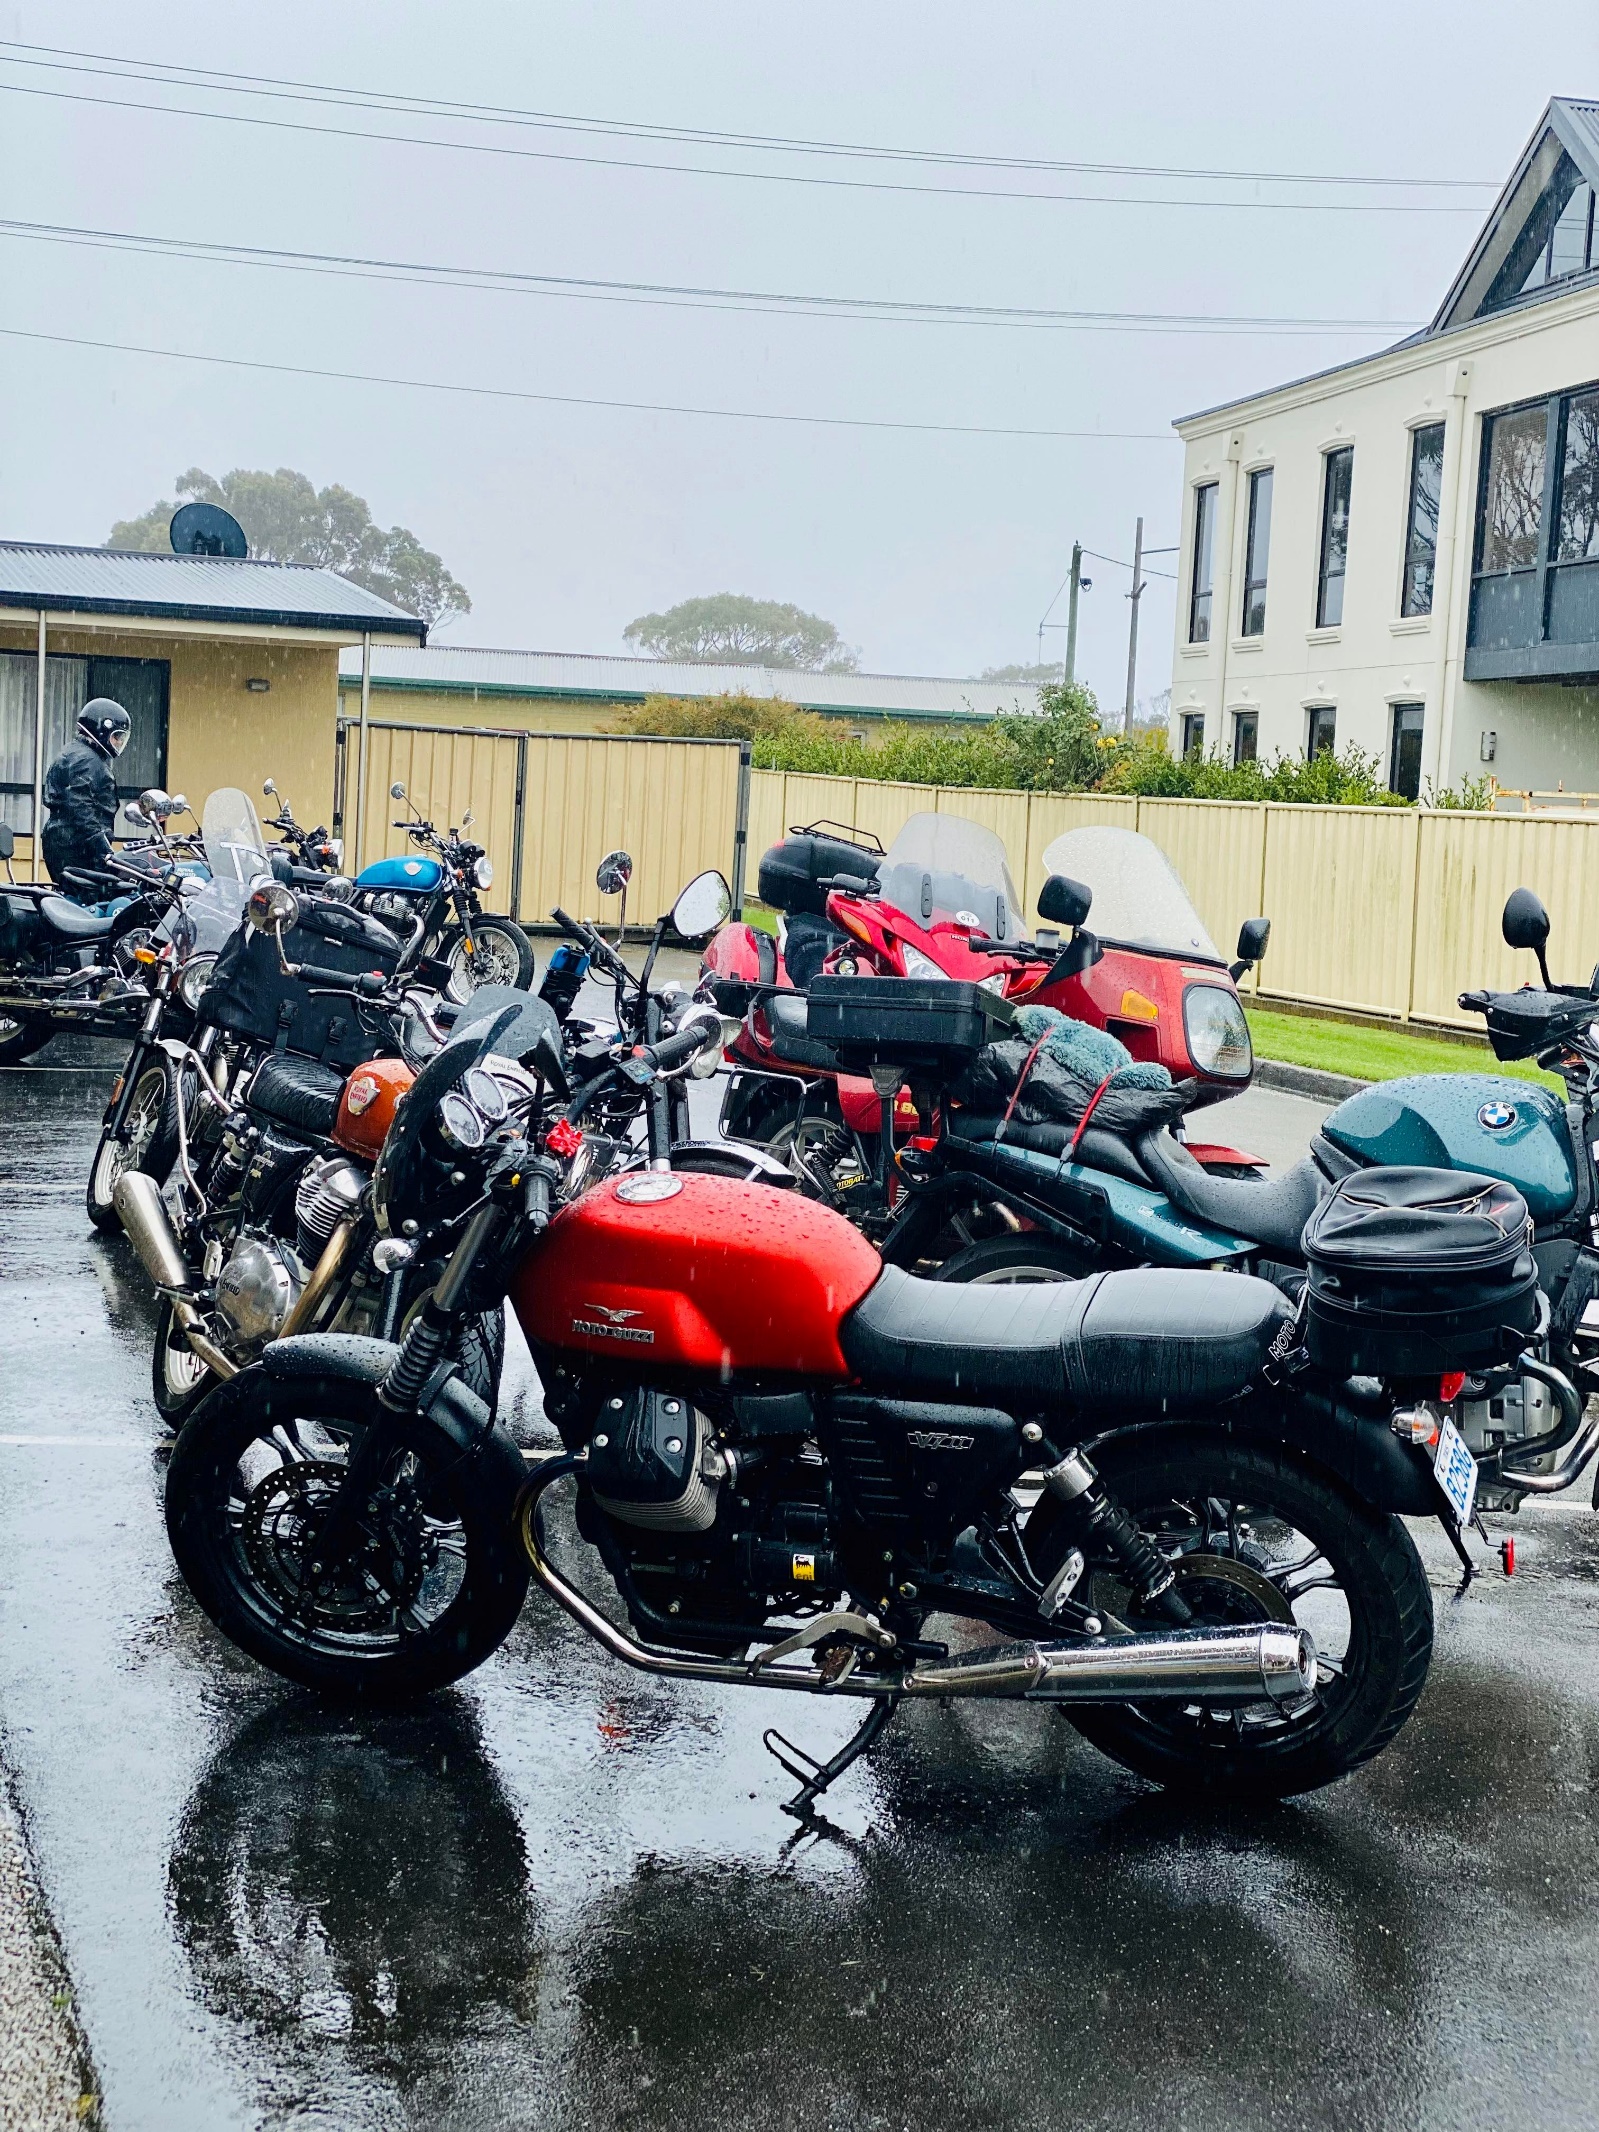 A group of motorcycles parked on the side of a road Description automatically generated with medium confidence